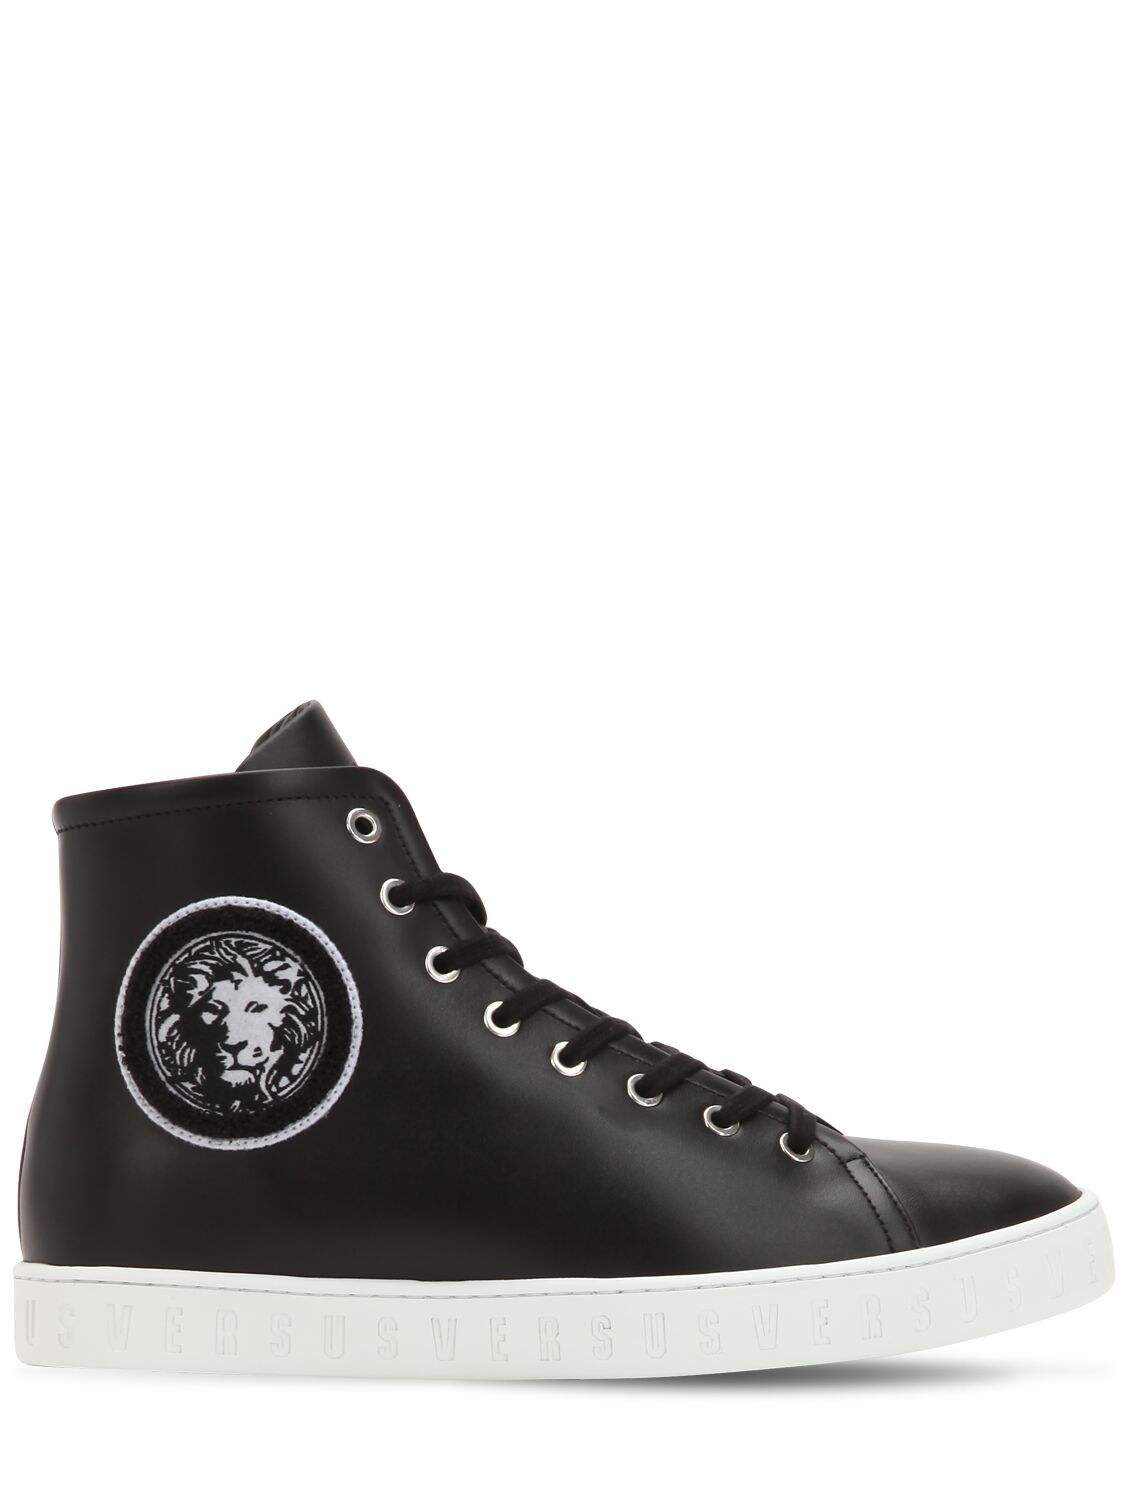 Versus Lion Head Leather High Top Trainers In Black